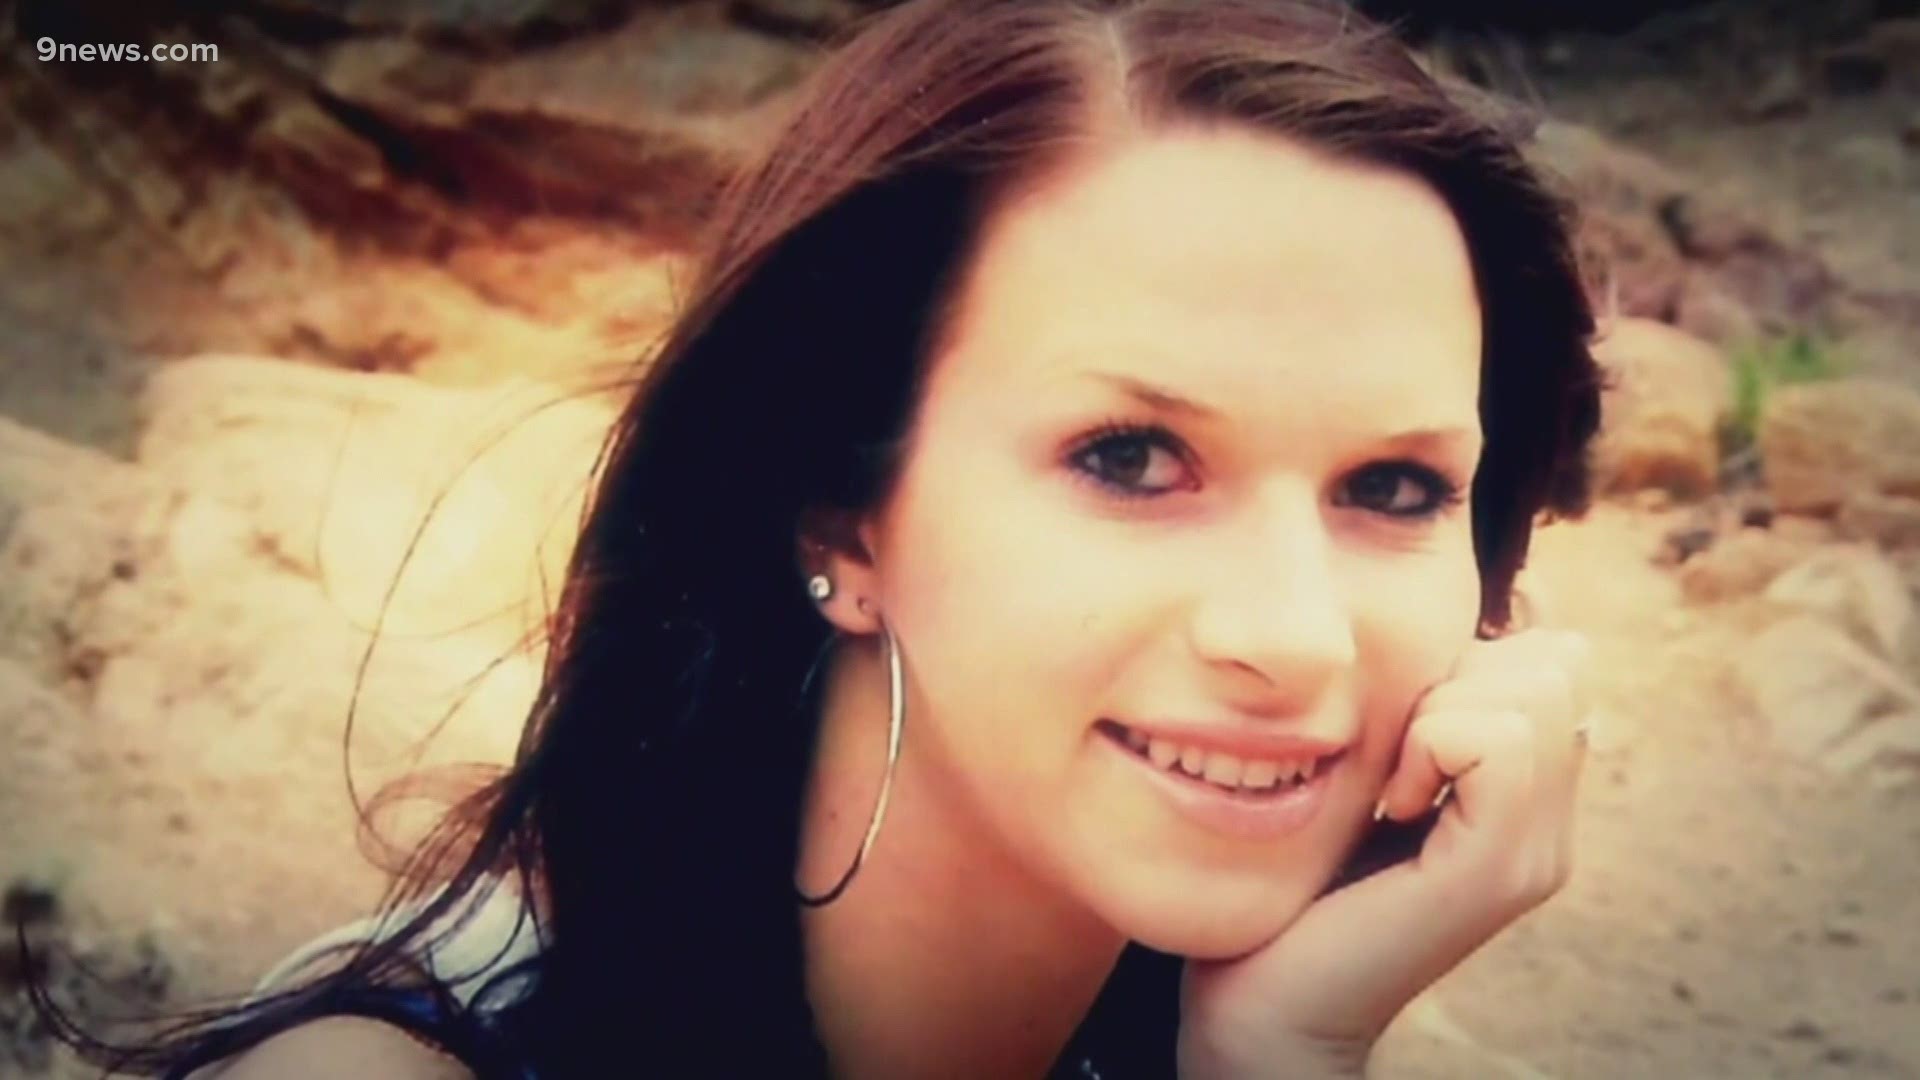 Schelling was 21 years old and pregnant when she disappeared in 2013. Donthe Lucas is charged with first-degree murder in connection to her disappearance.